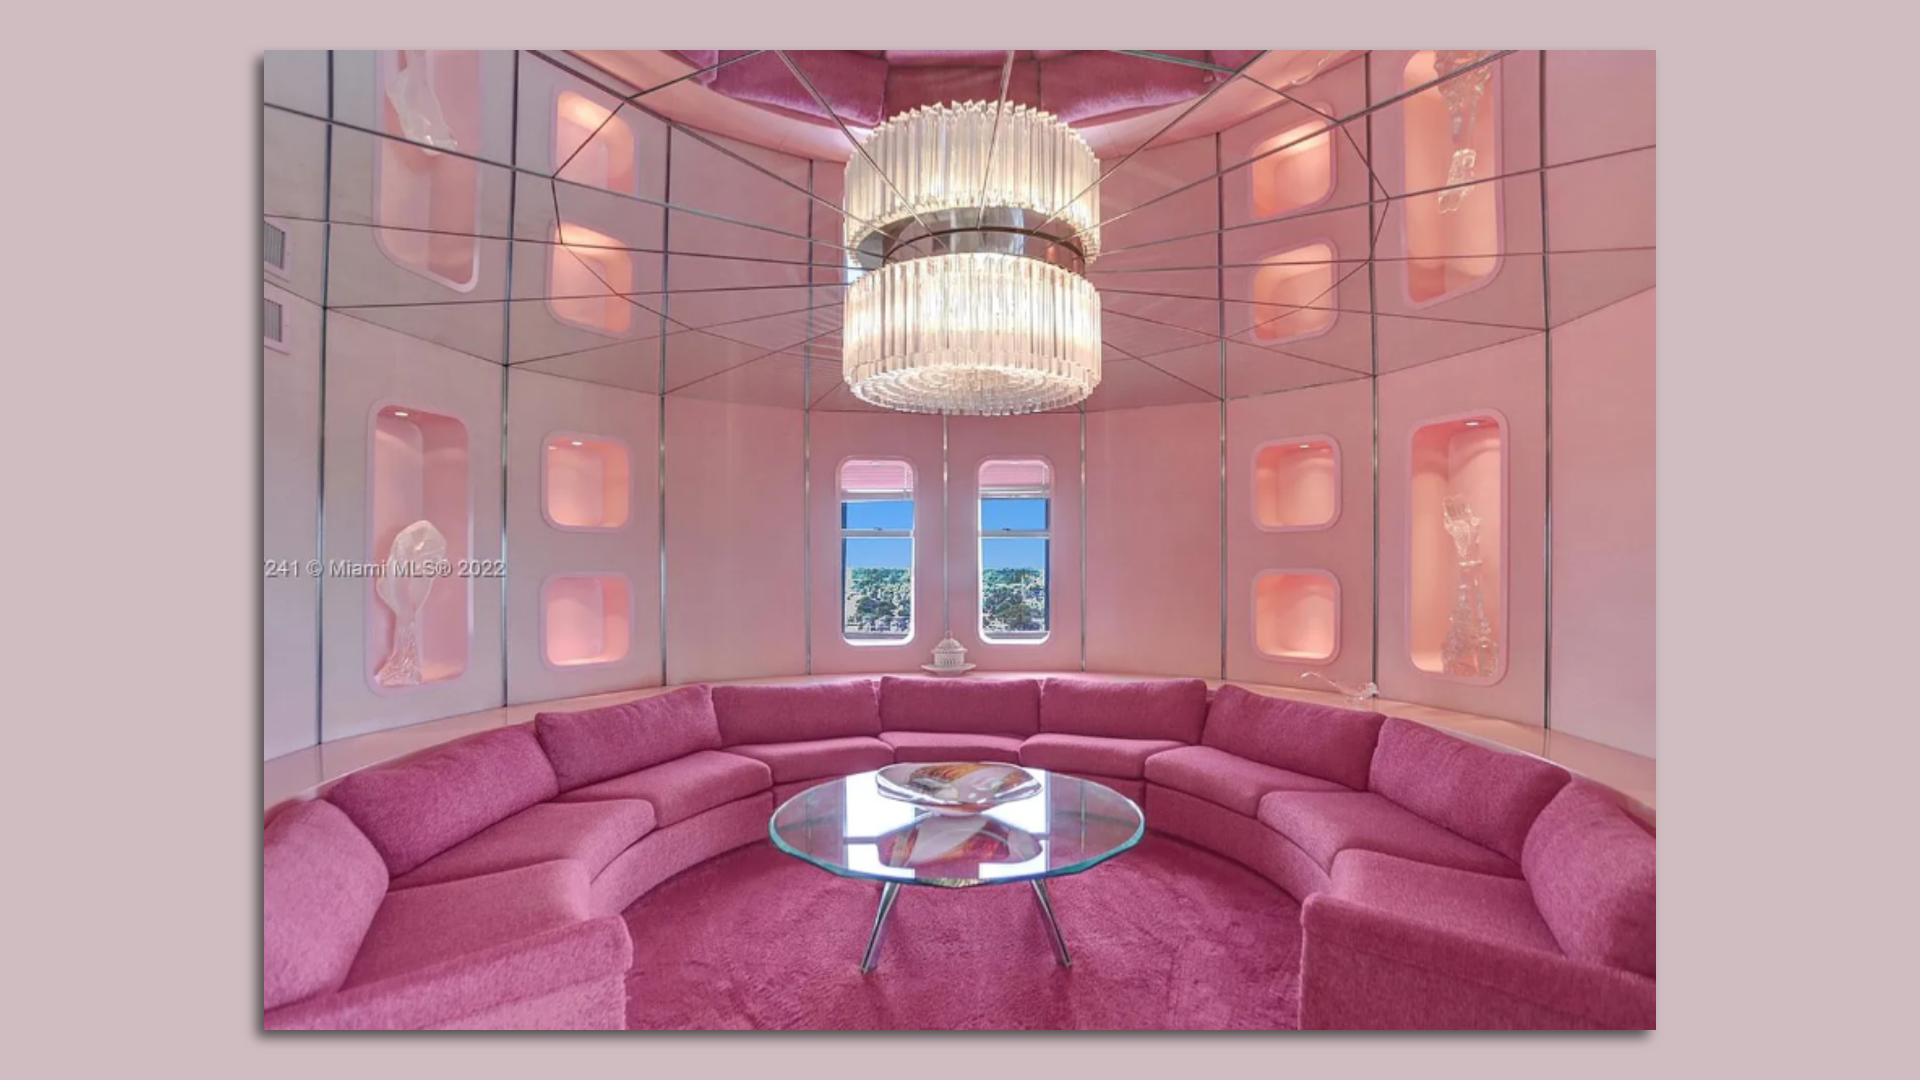 A pink rotunda wrapped in mirrors, with pink couches and carpeting.